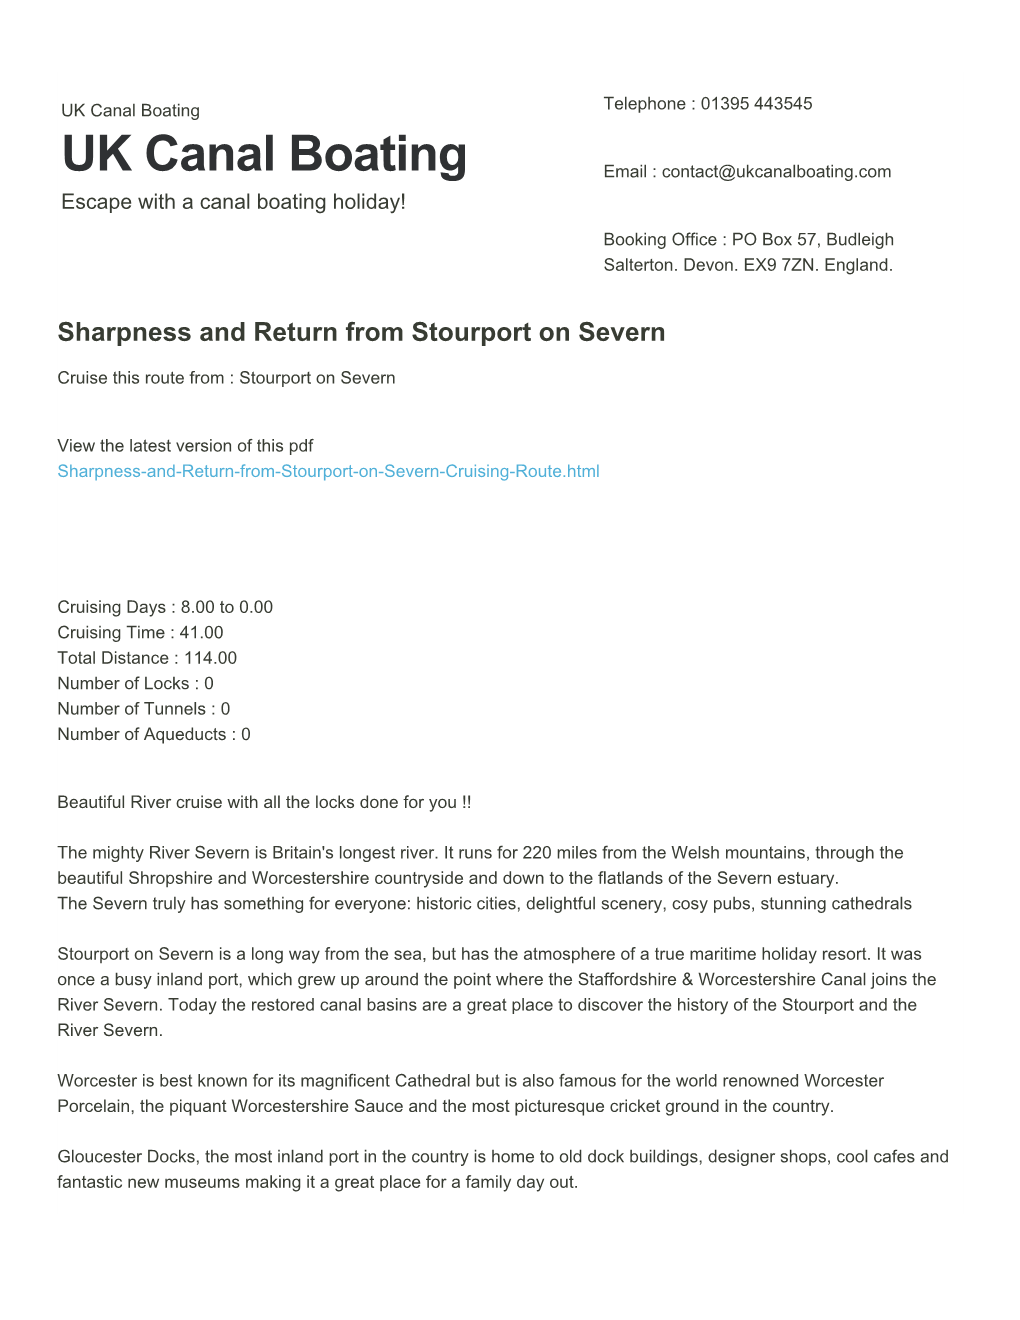 Sharpness and Return from Stourport on Severn | UK Canal Boating